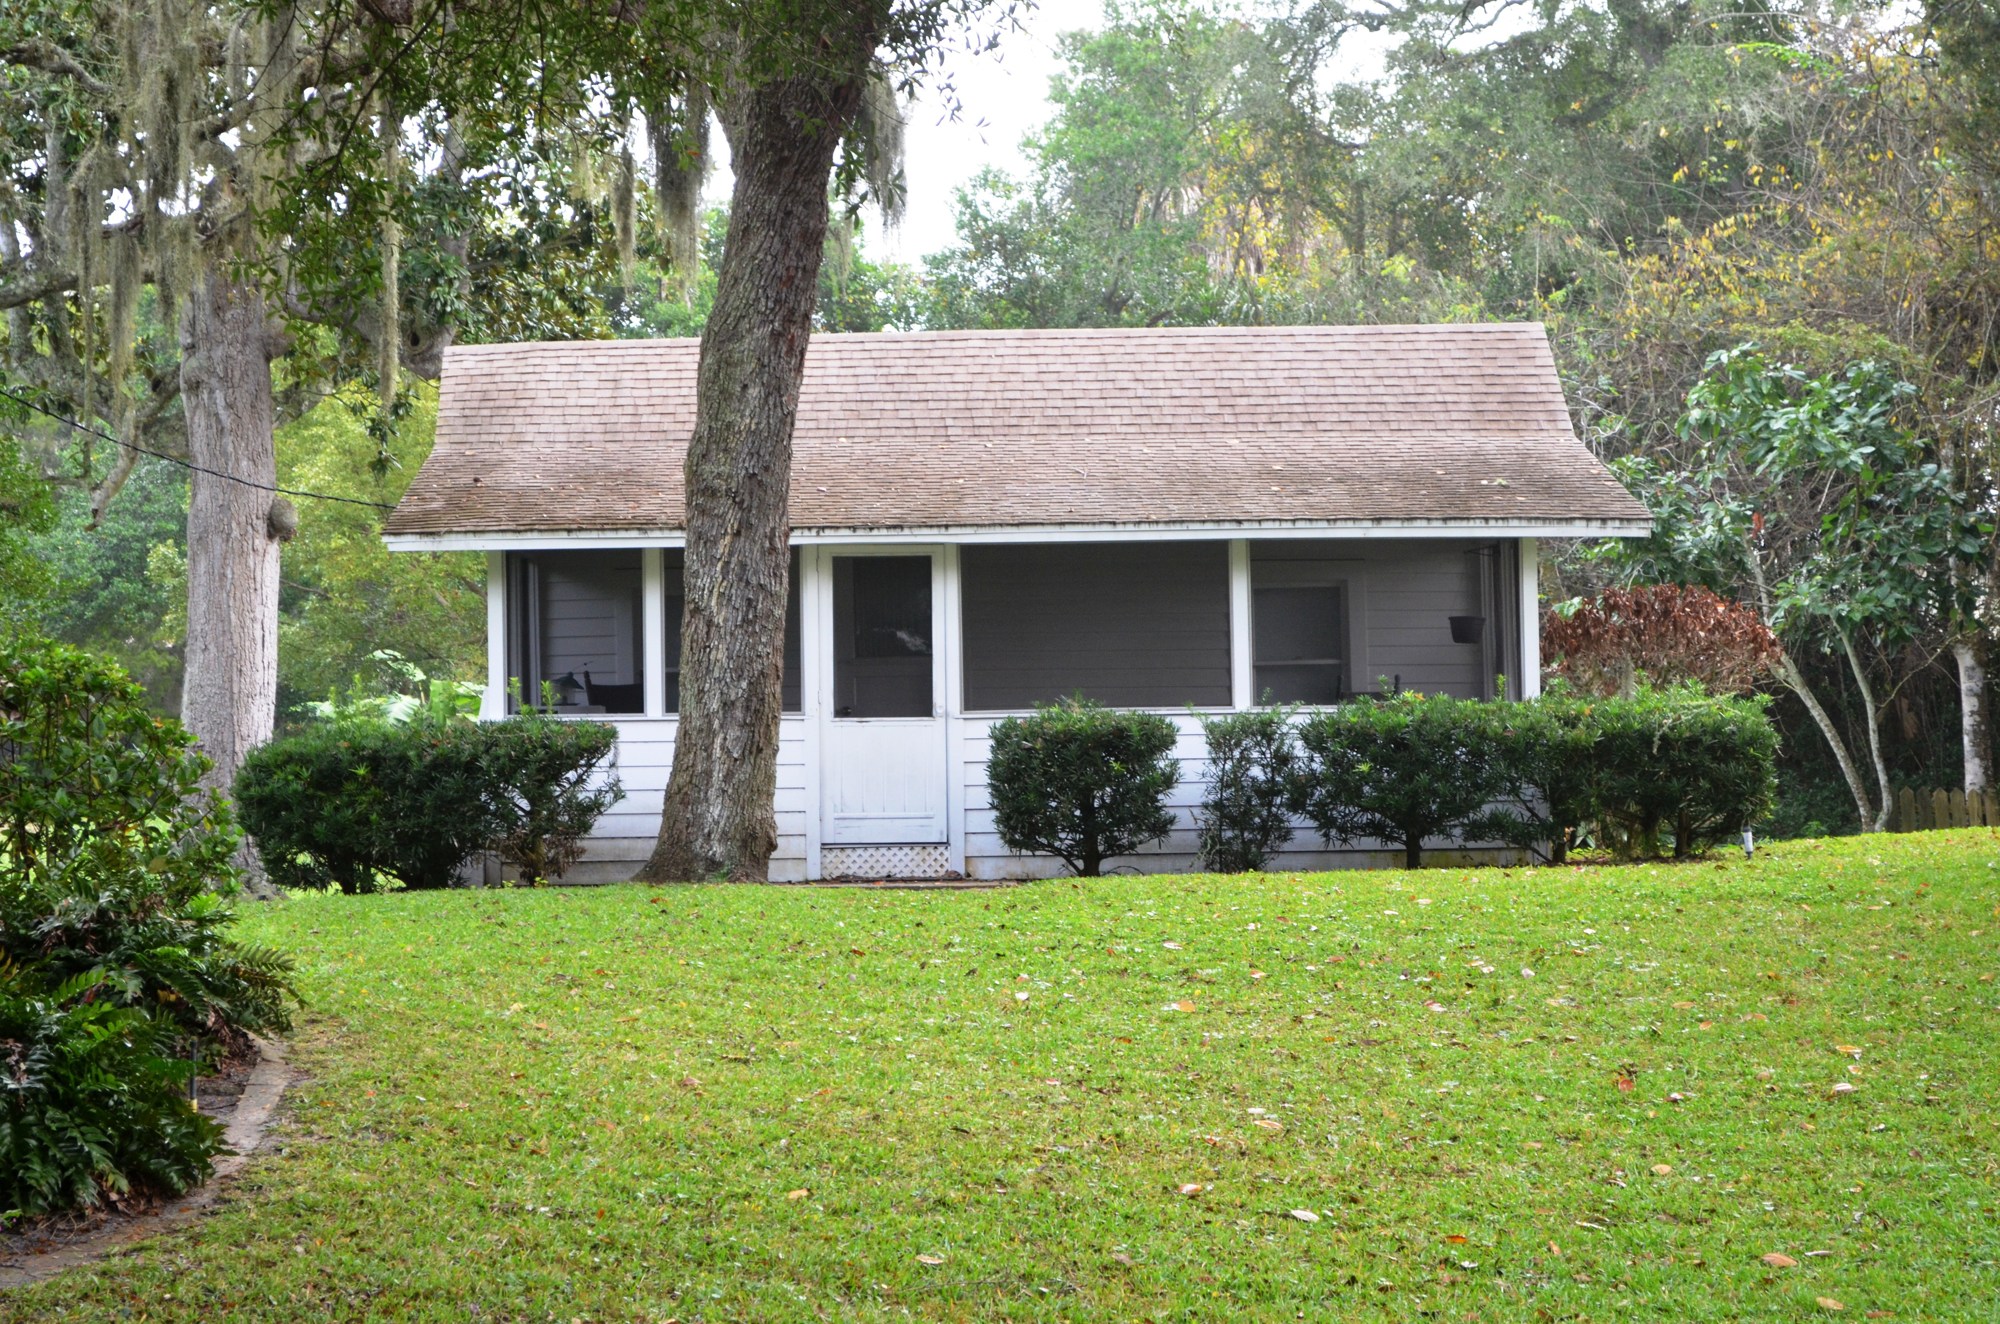 The cottage at 659 John Anderson Drive was used as quarters for workers in an orange grove.